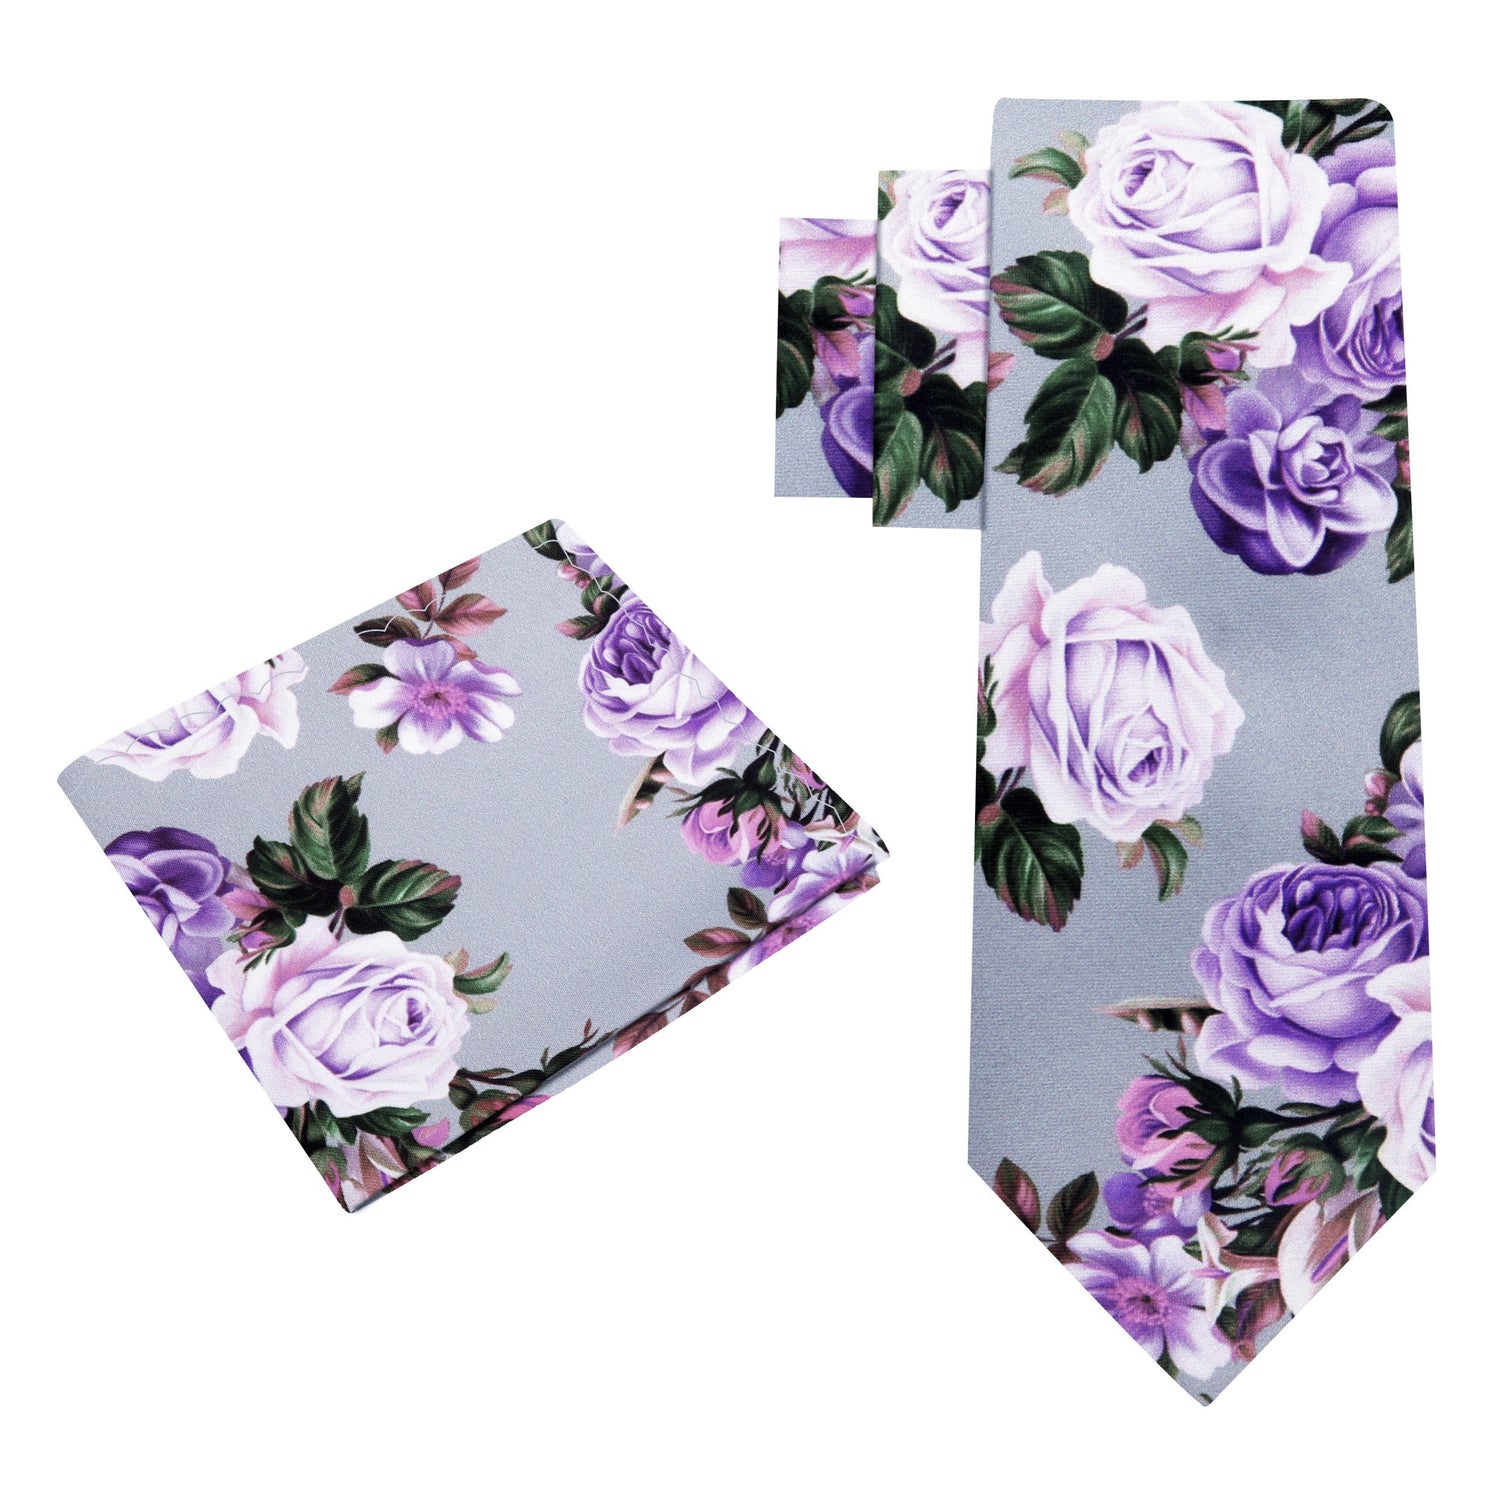 Alt View: Grey, Pink, Purple and Green Floral Necktie with Matching Square